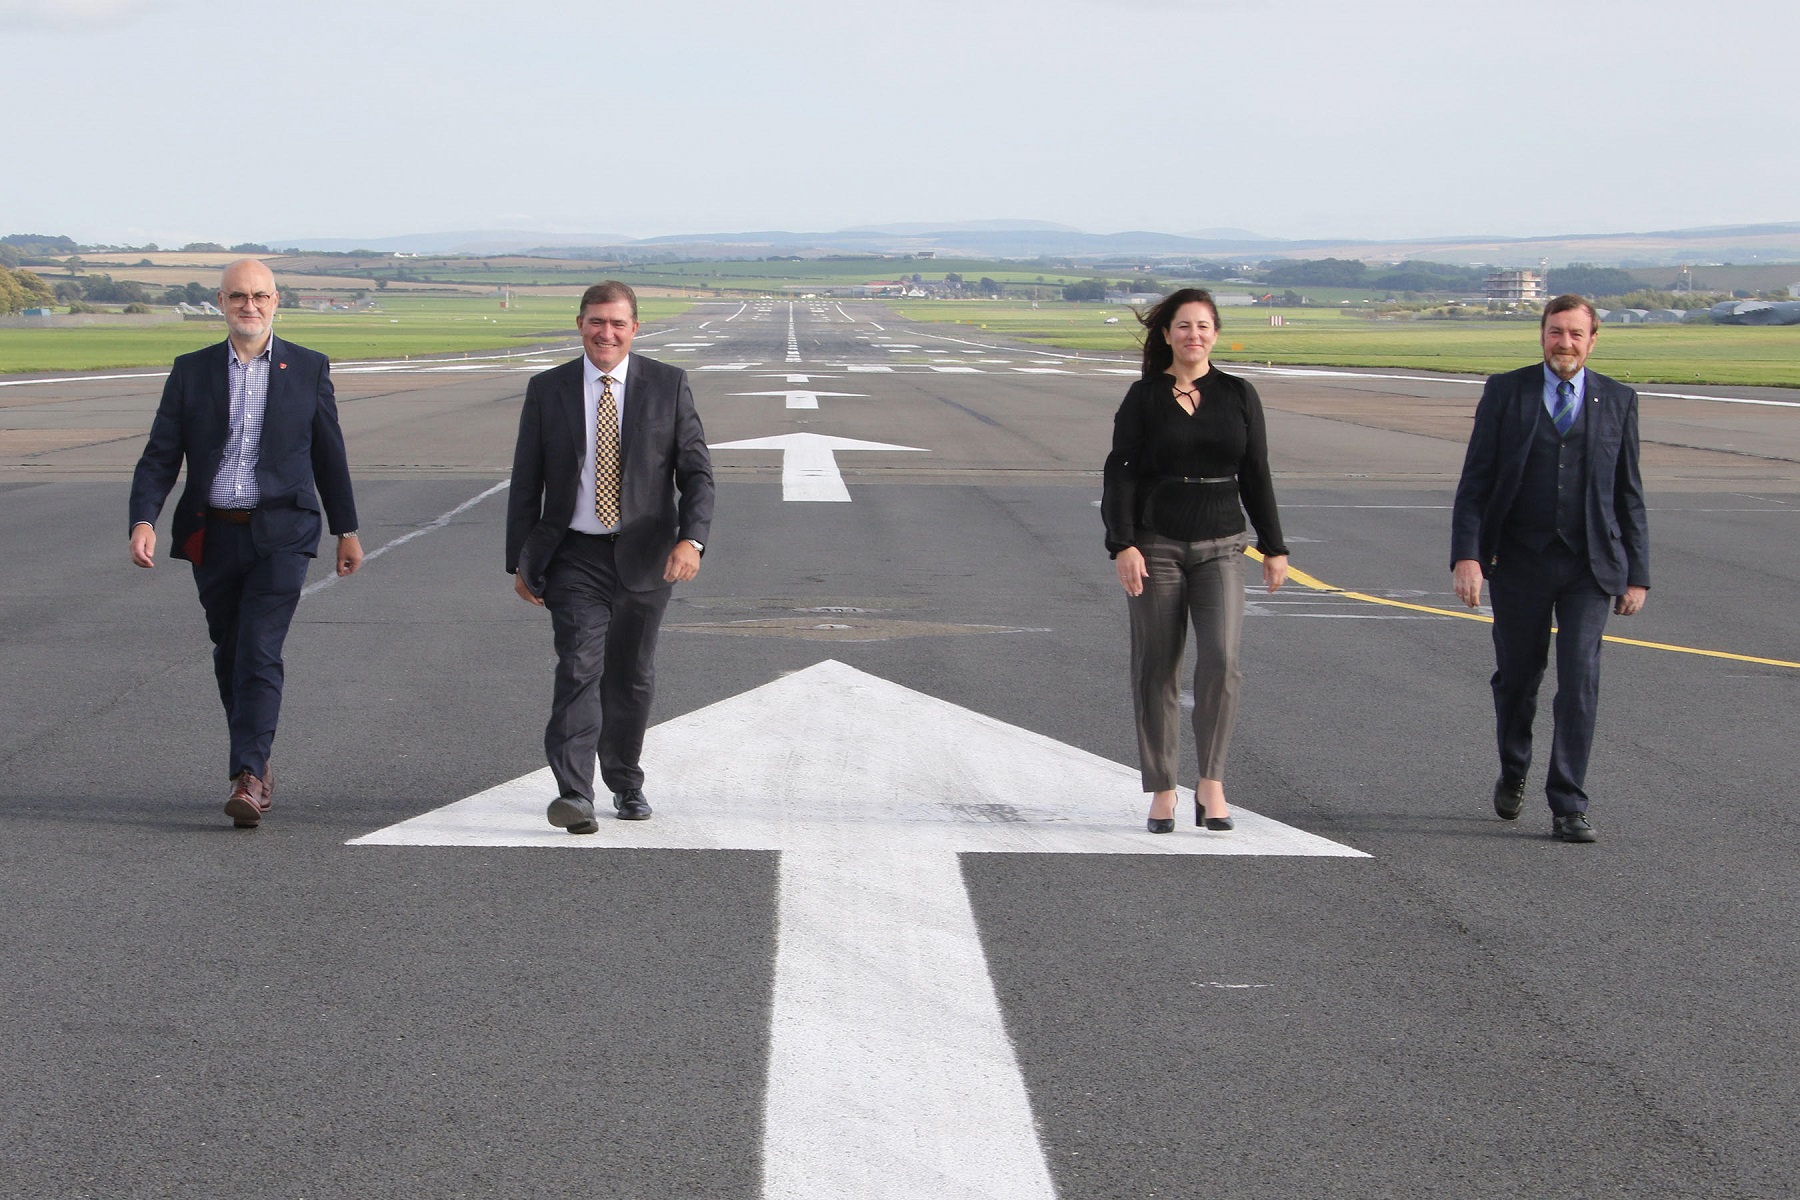 Prestwick Spaceport to accelerate launch hub plans during international airshow